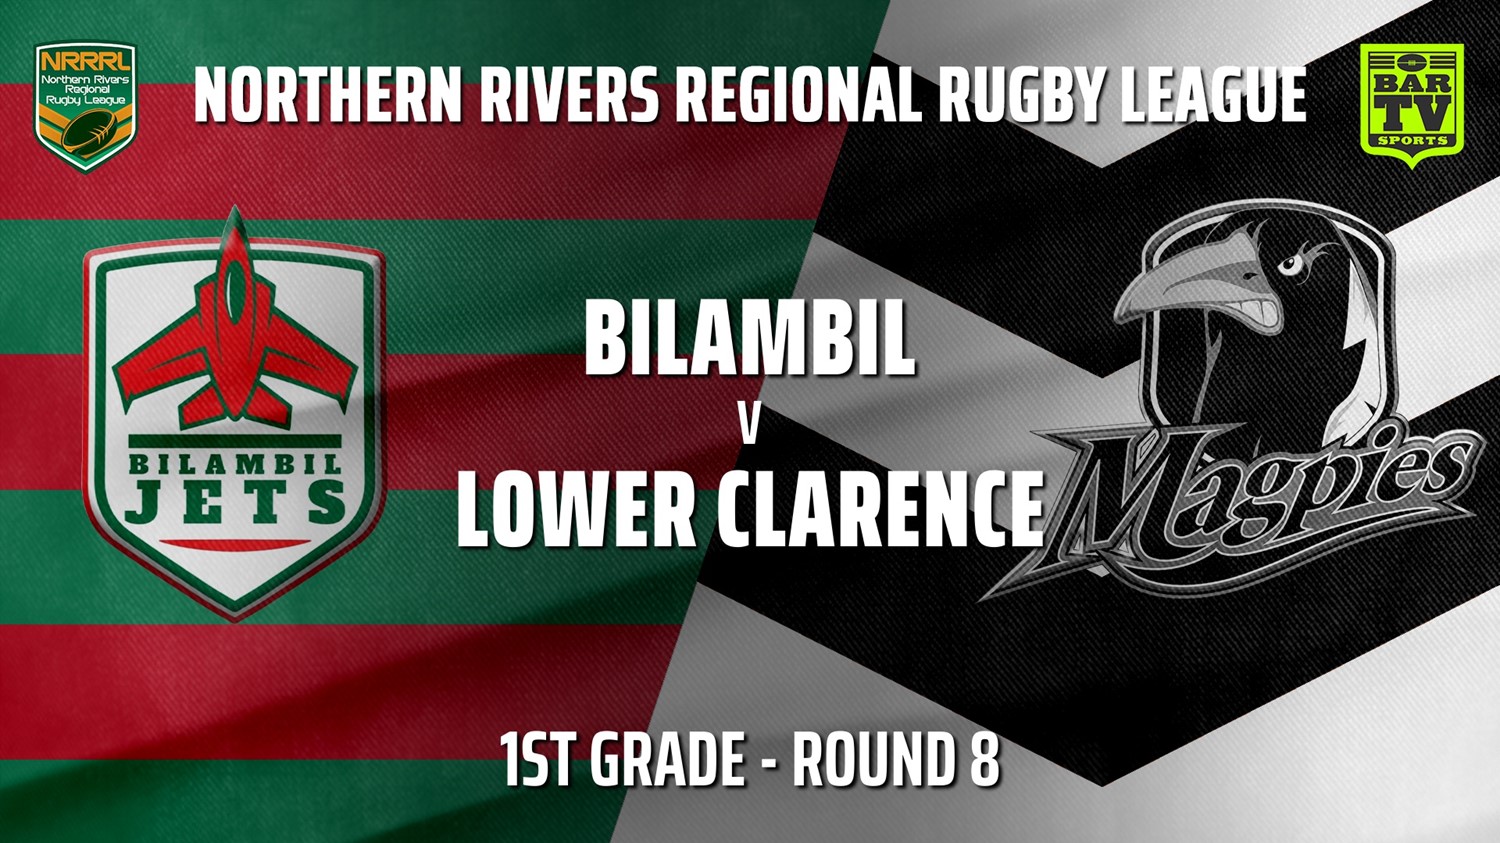 210627-Northern Rivers Round 8 - 1st Grade - Bilambil Jets v Lower Clarence Magpies Slate Image